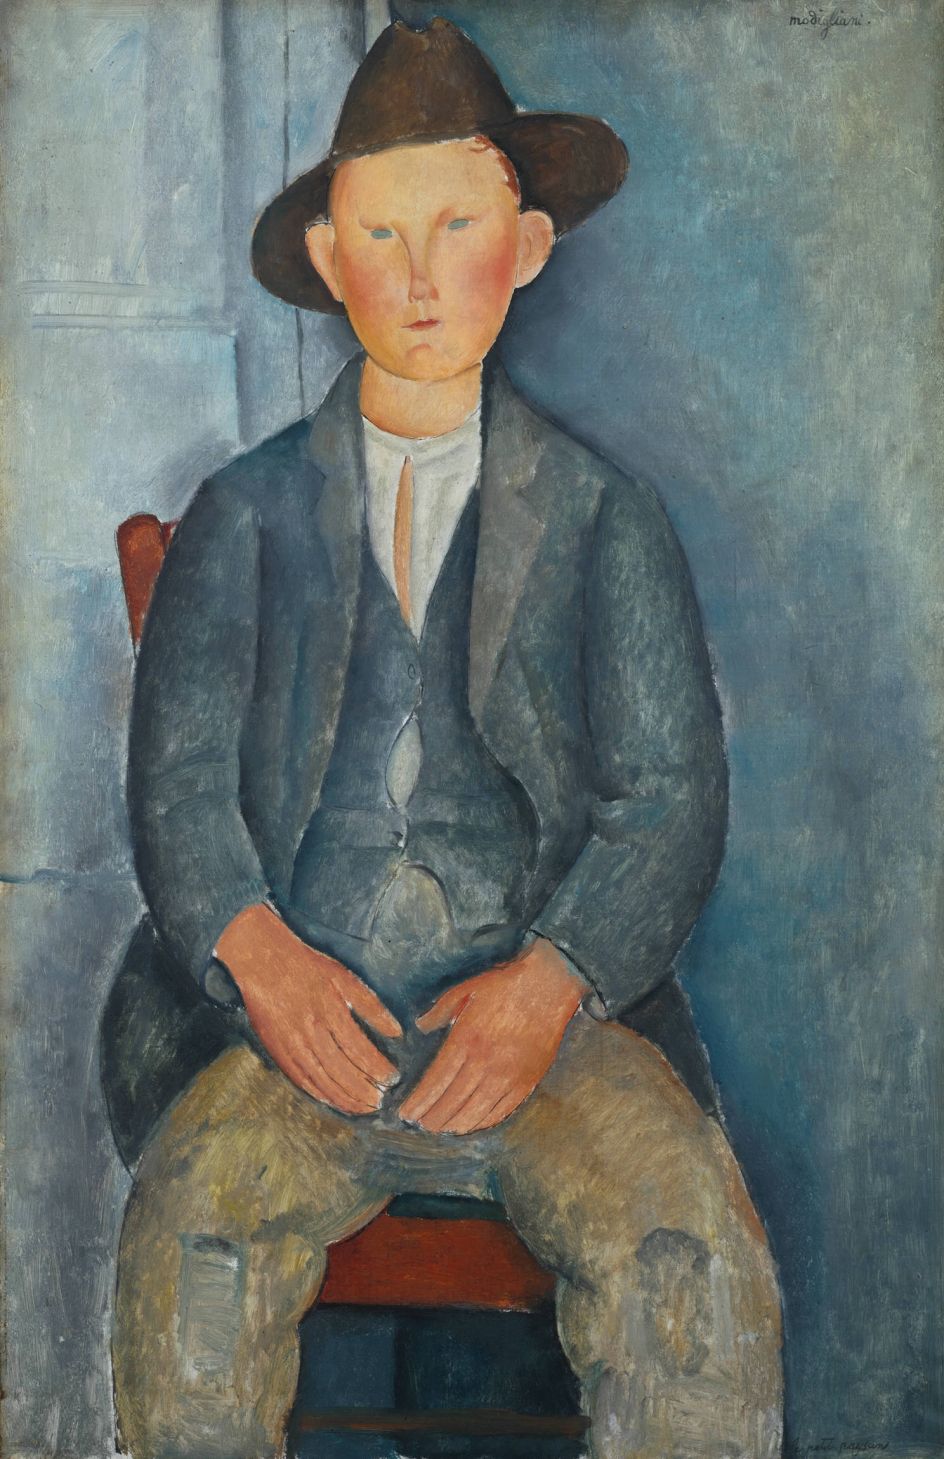 The Little Peasant c.1918 Medium Oil paint on canvas 1000 x 645 mm Tate, presented by Miss Jenny Blaker in memory of Hugh Blaker 1941